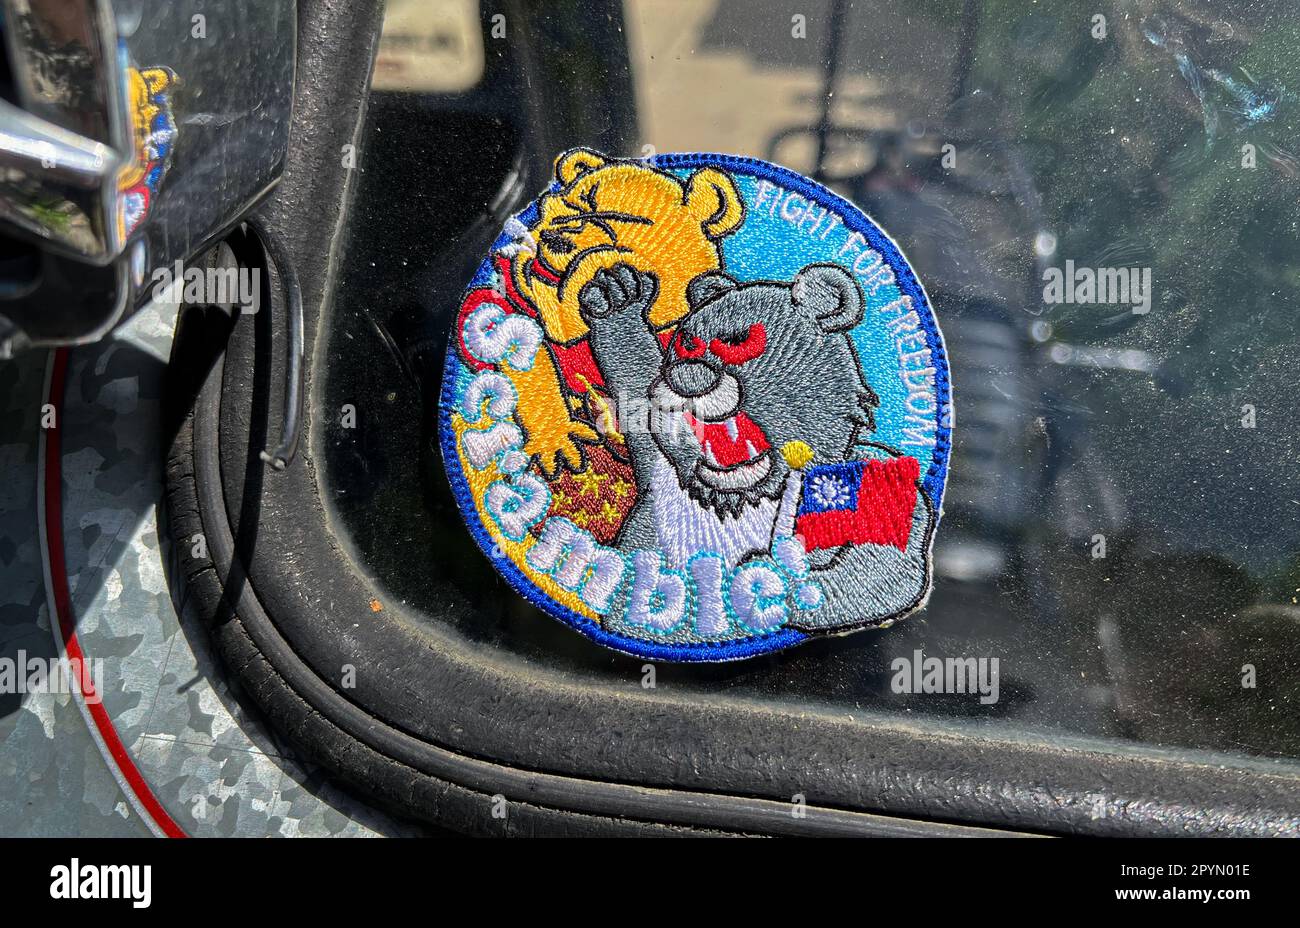 A Philippines tricycle showing support to Taiwan independence with the viral punching Winnie the Pooh badge patch reading 'Fight for Freedom,Scramble' Stock Photo